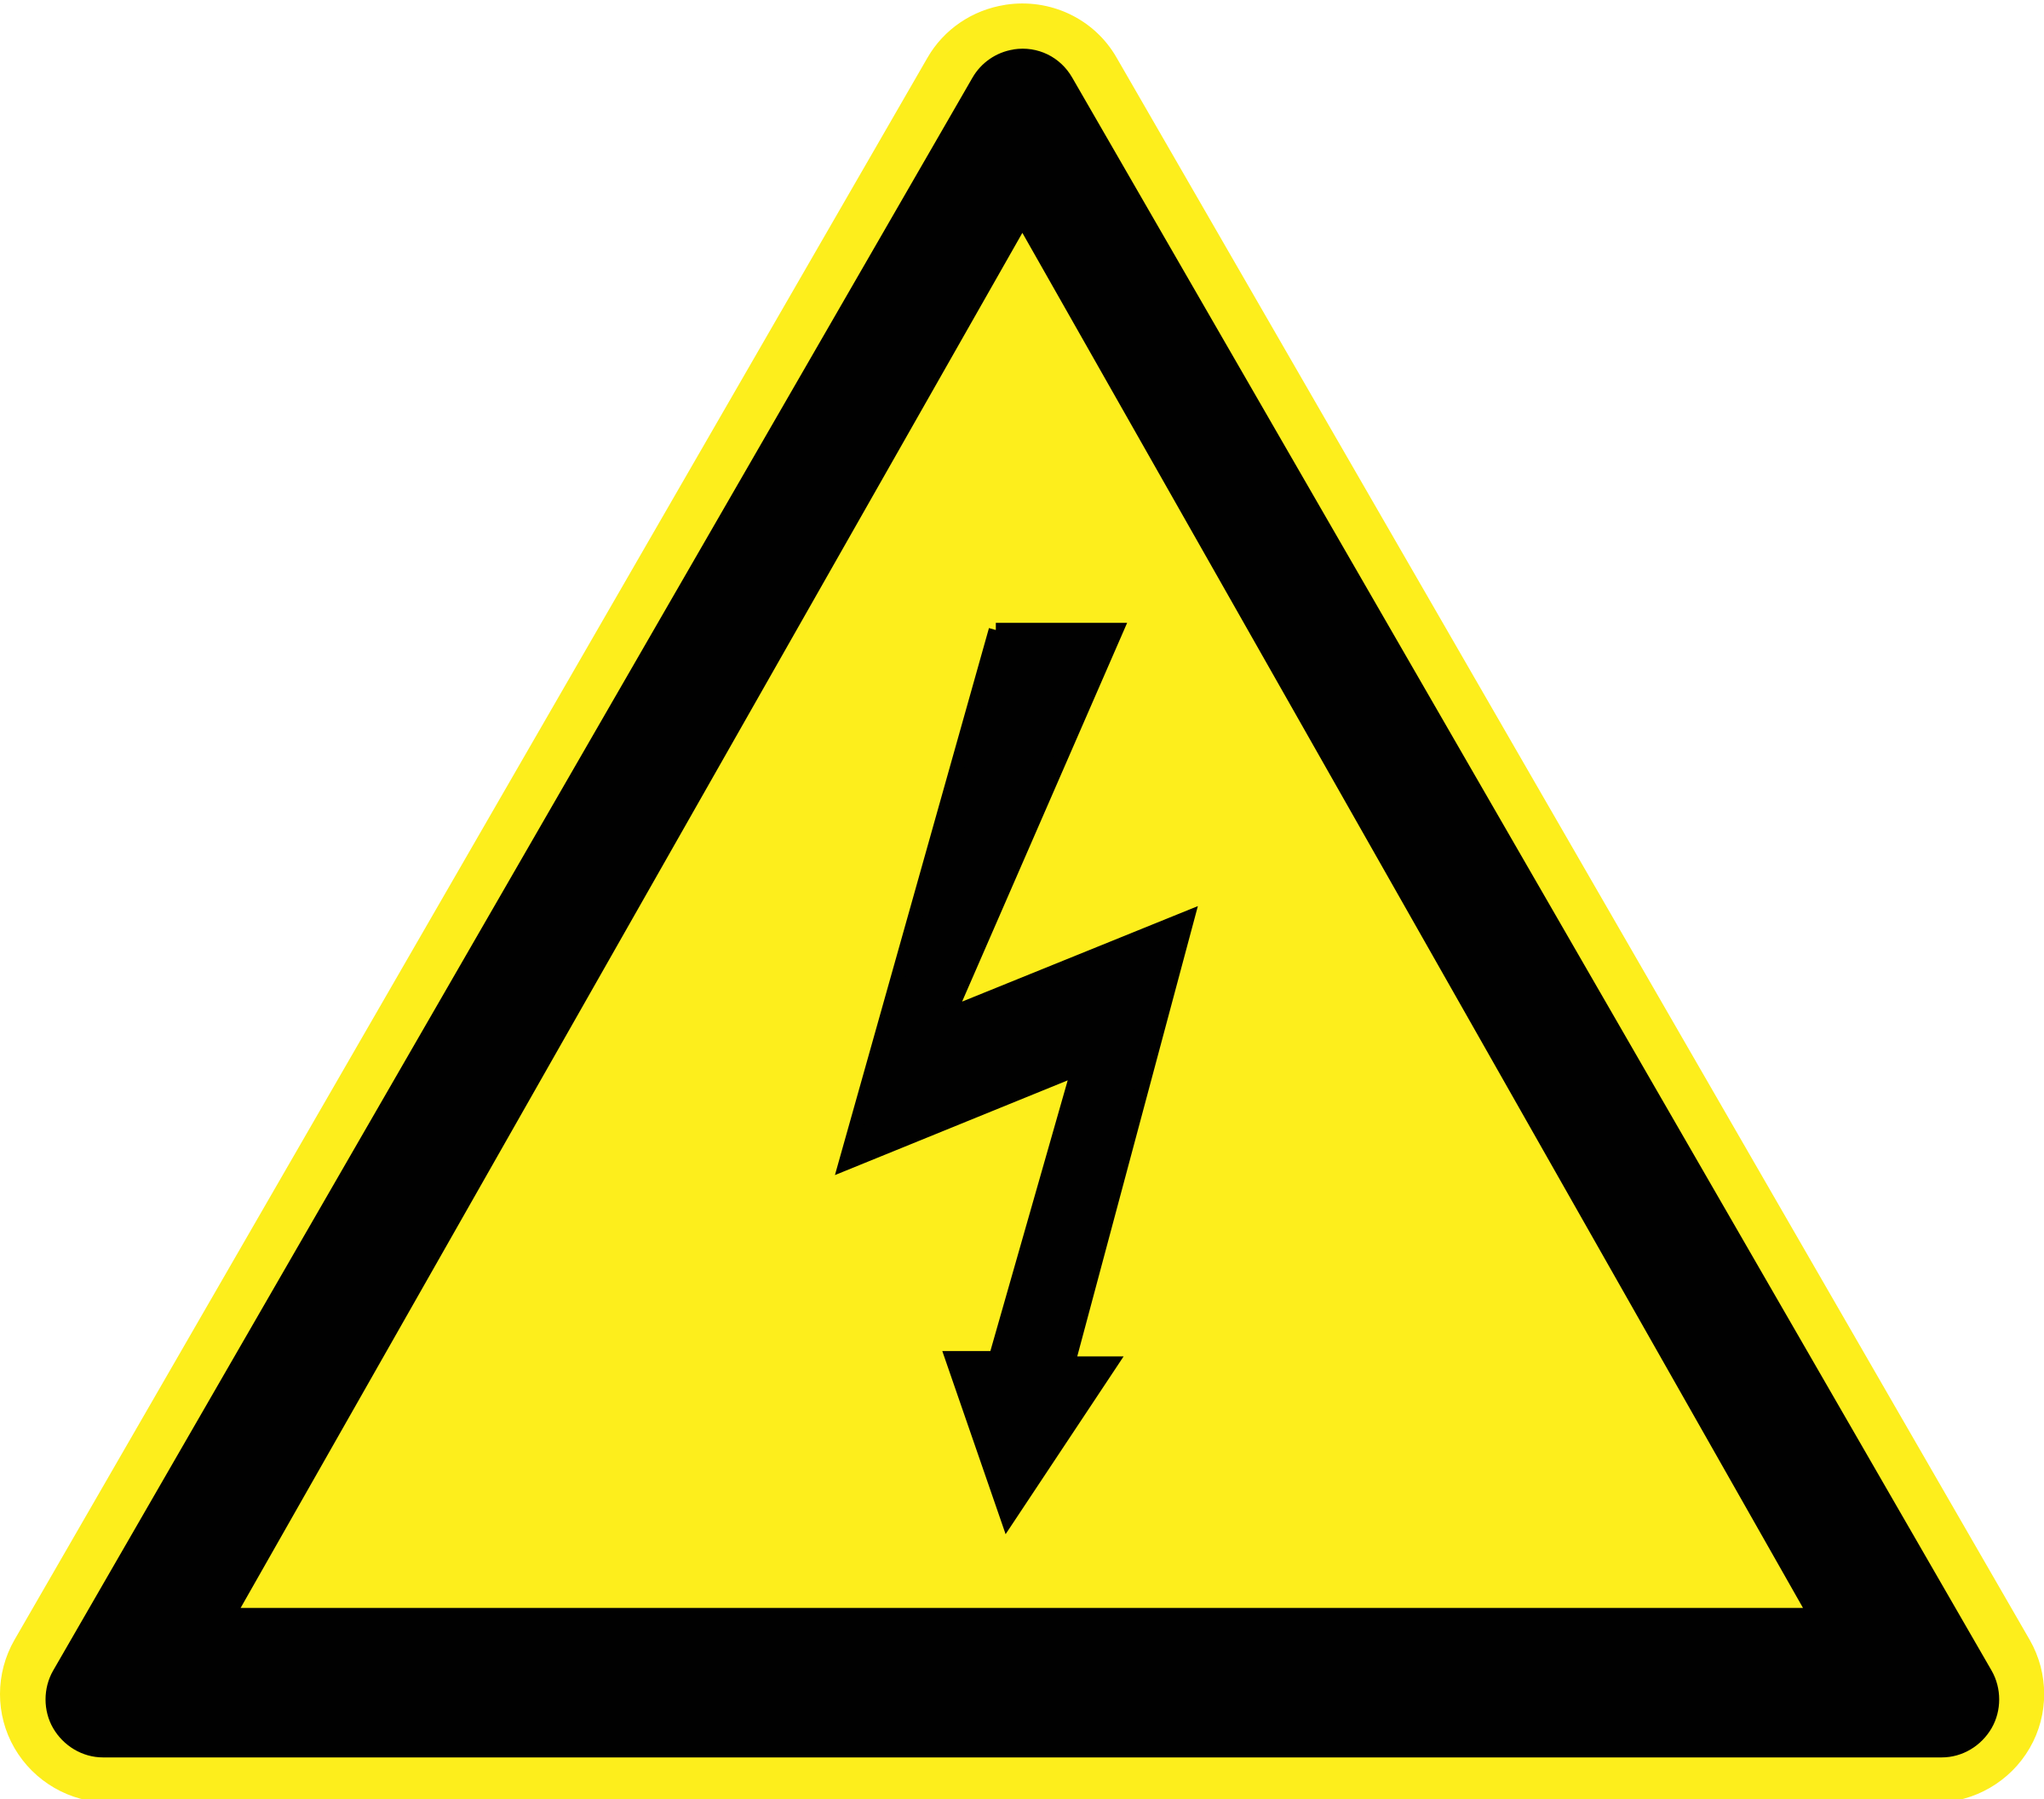 Signs Hazard Warning   Electricity By H0us3s